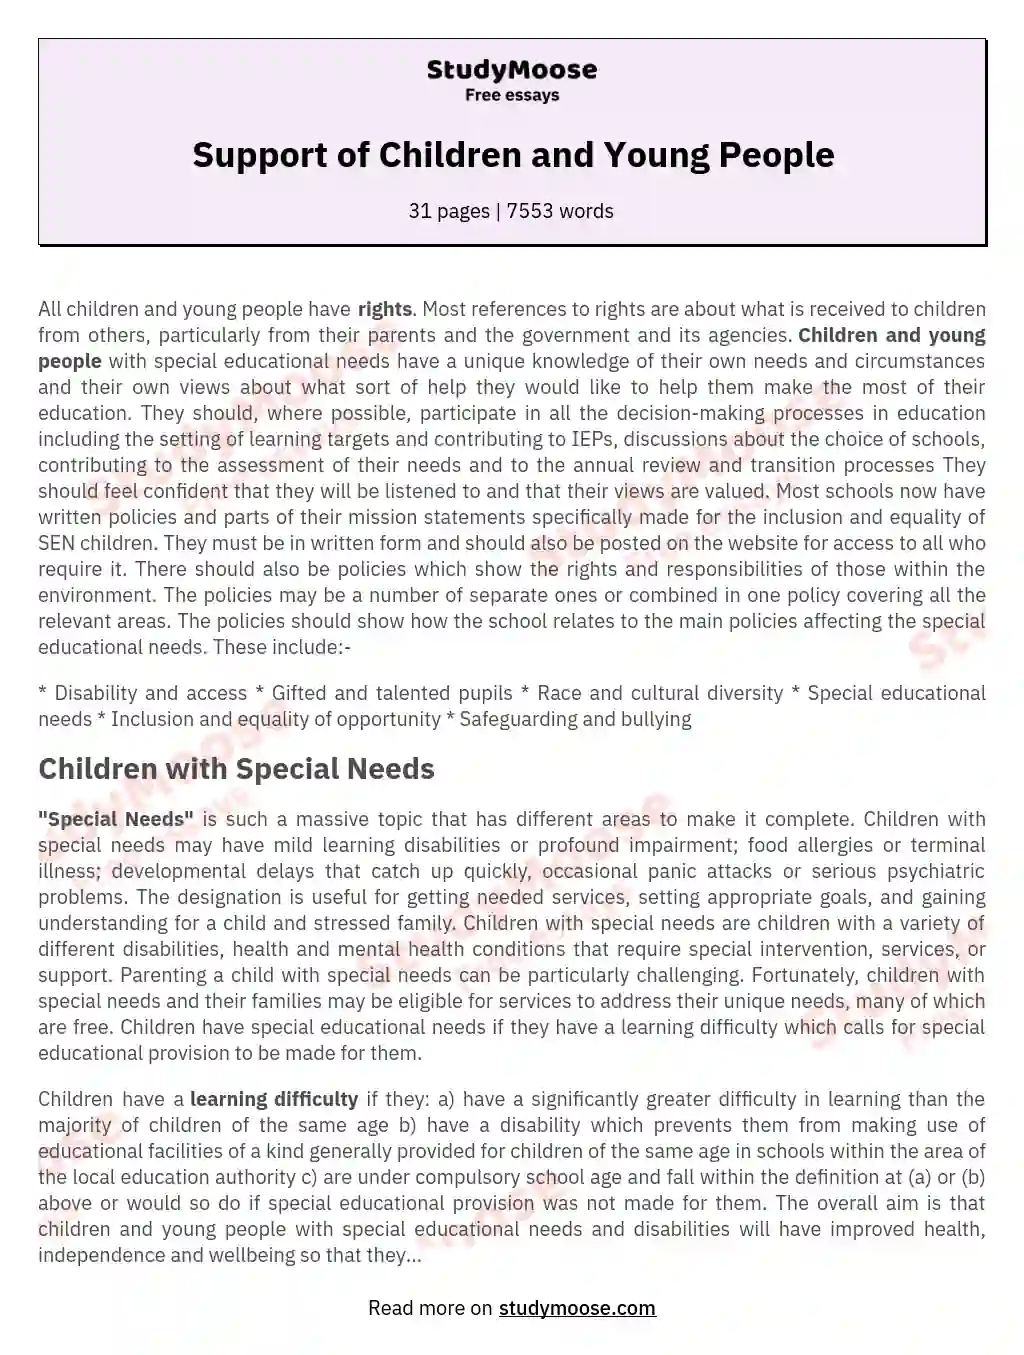 Support of Children and Young People essay